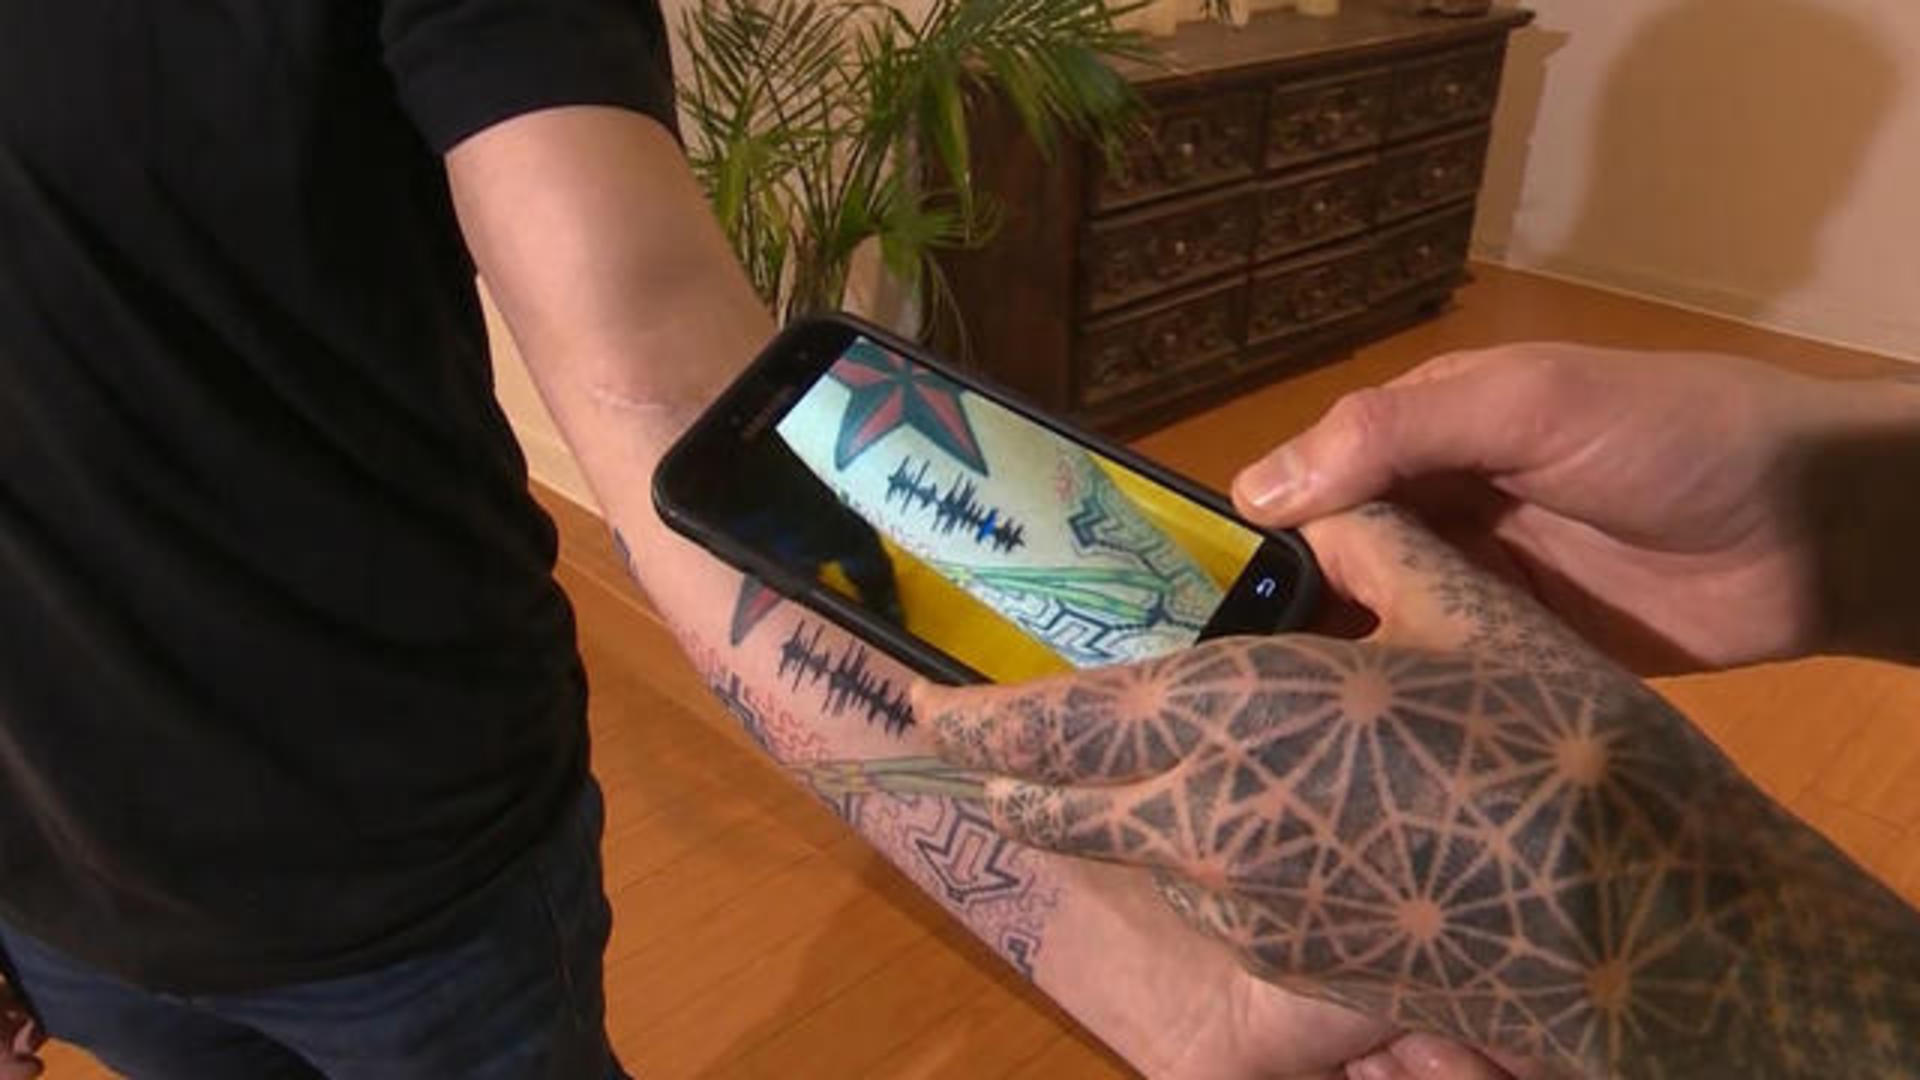 With soundwave tattoos, you can record audio onto your skin - CBS News